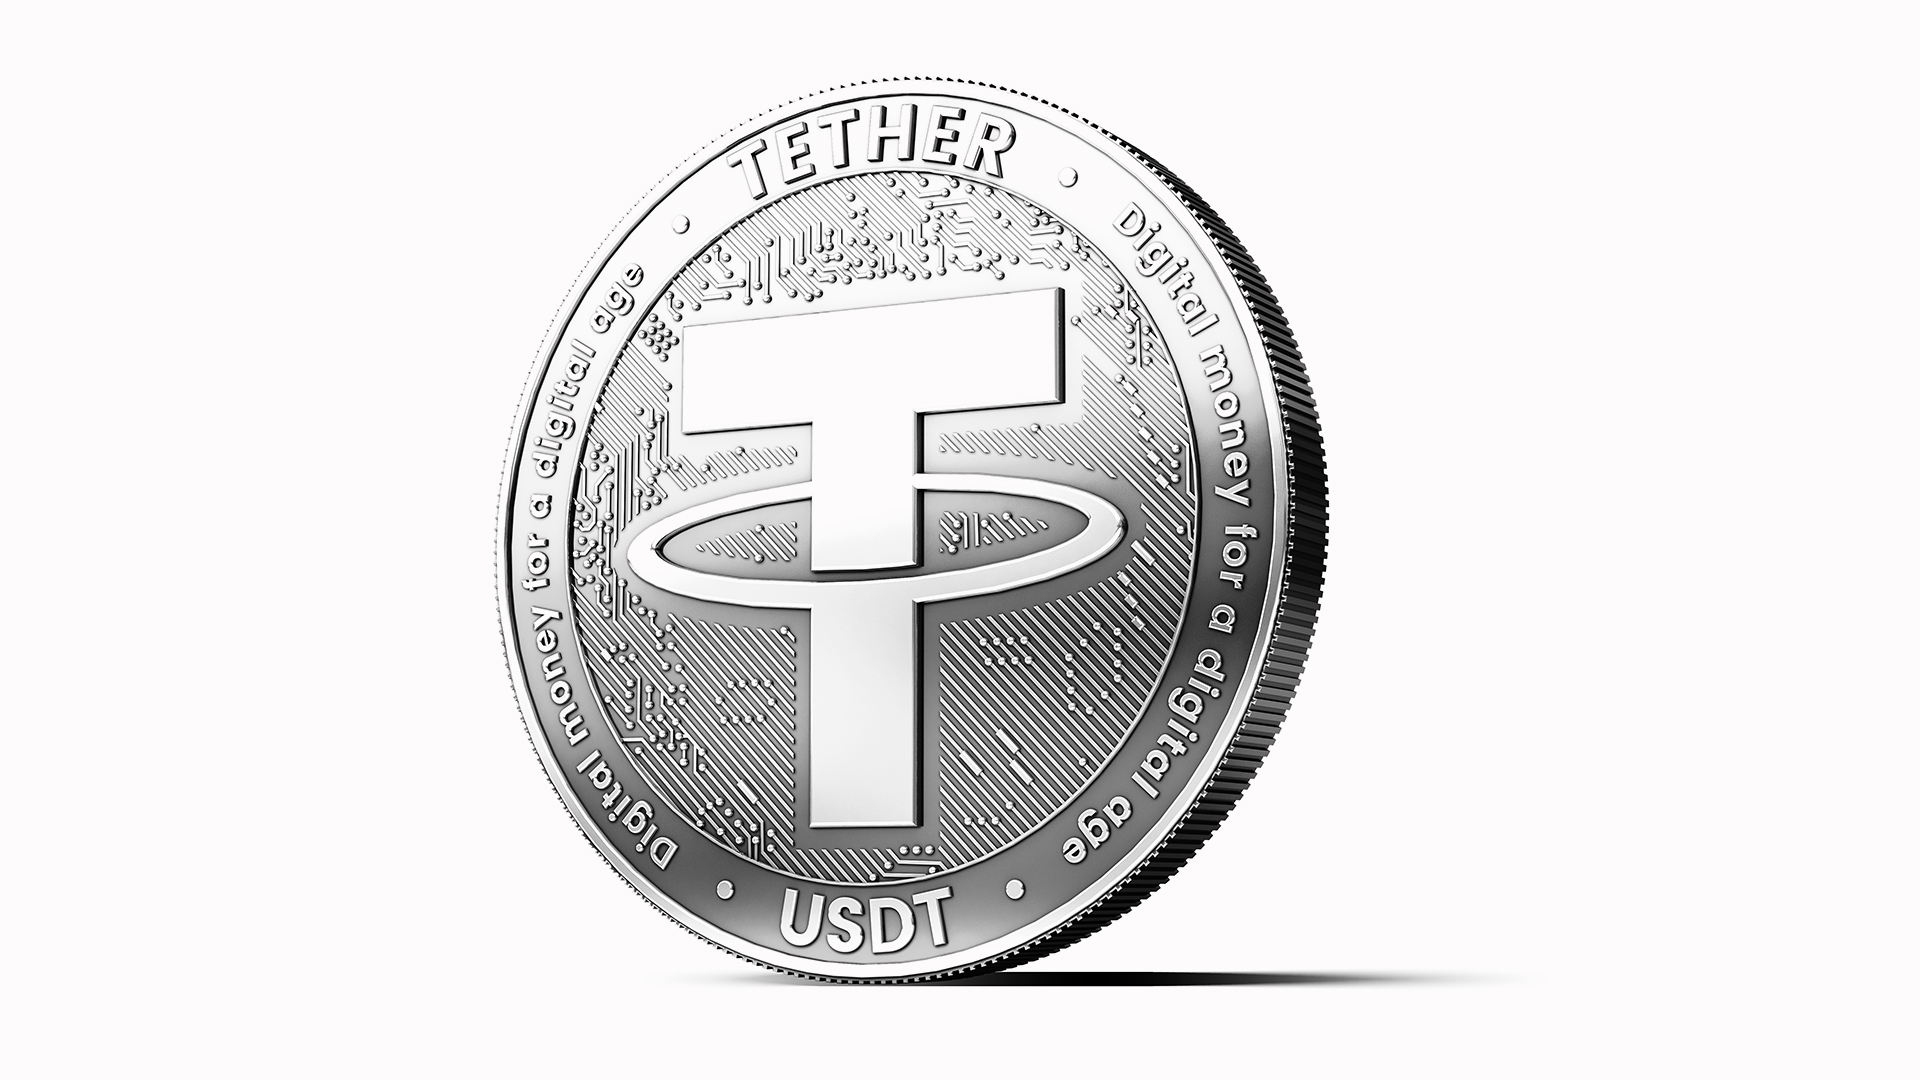 What’s Happening With Tether?